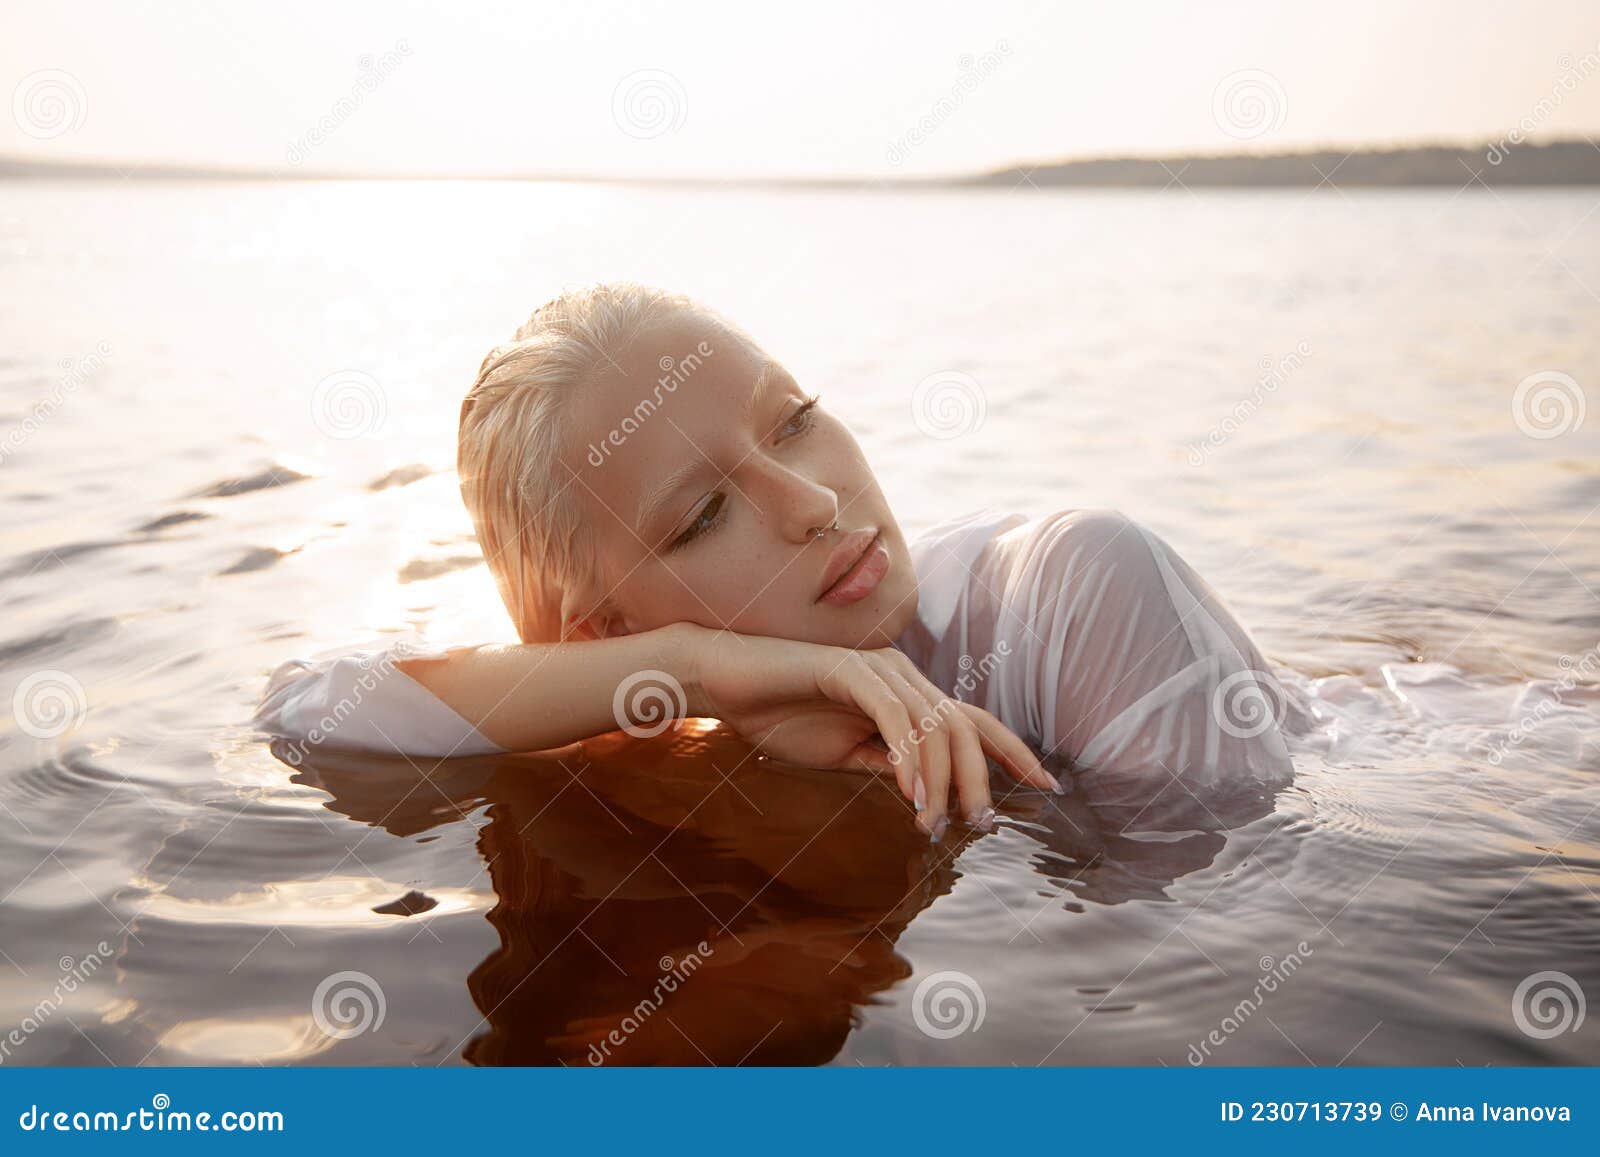 Sexy Naked Wet Girl Big Tits - Nude Naked Woman in Water at Sunset. Beautiful Blonde Woman with Short Wet  Hair and Big Breasts, Art Portrait in Sea Stock Image - Image of blonde,  hair: 230713739